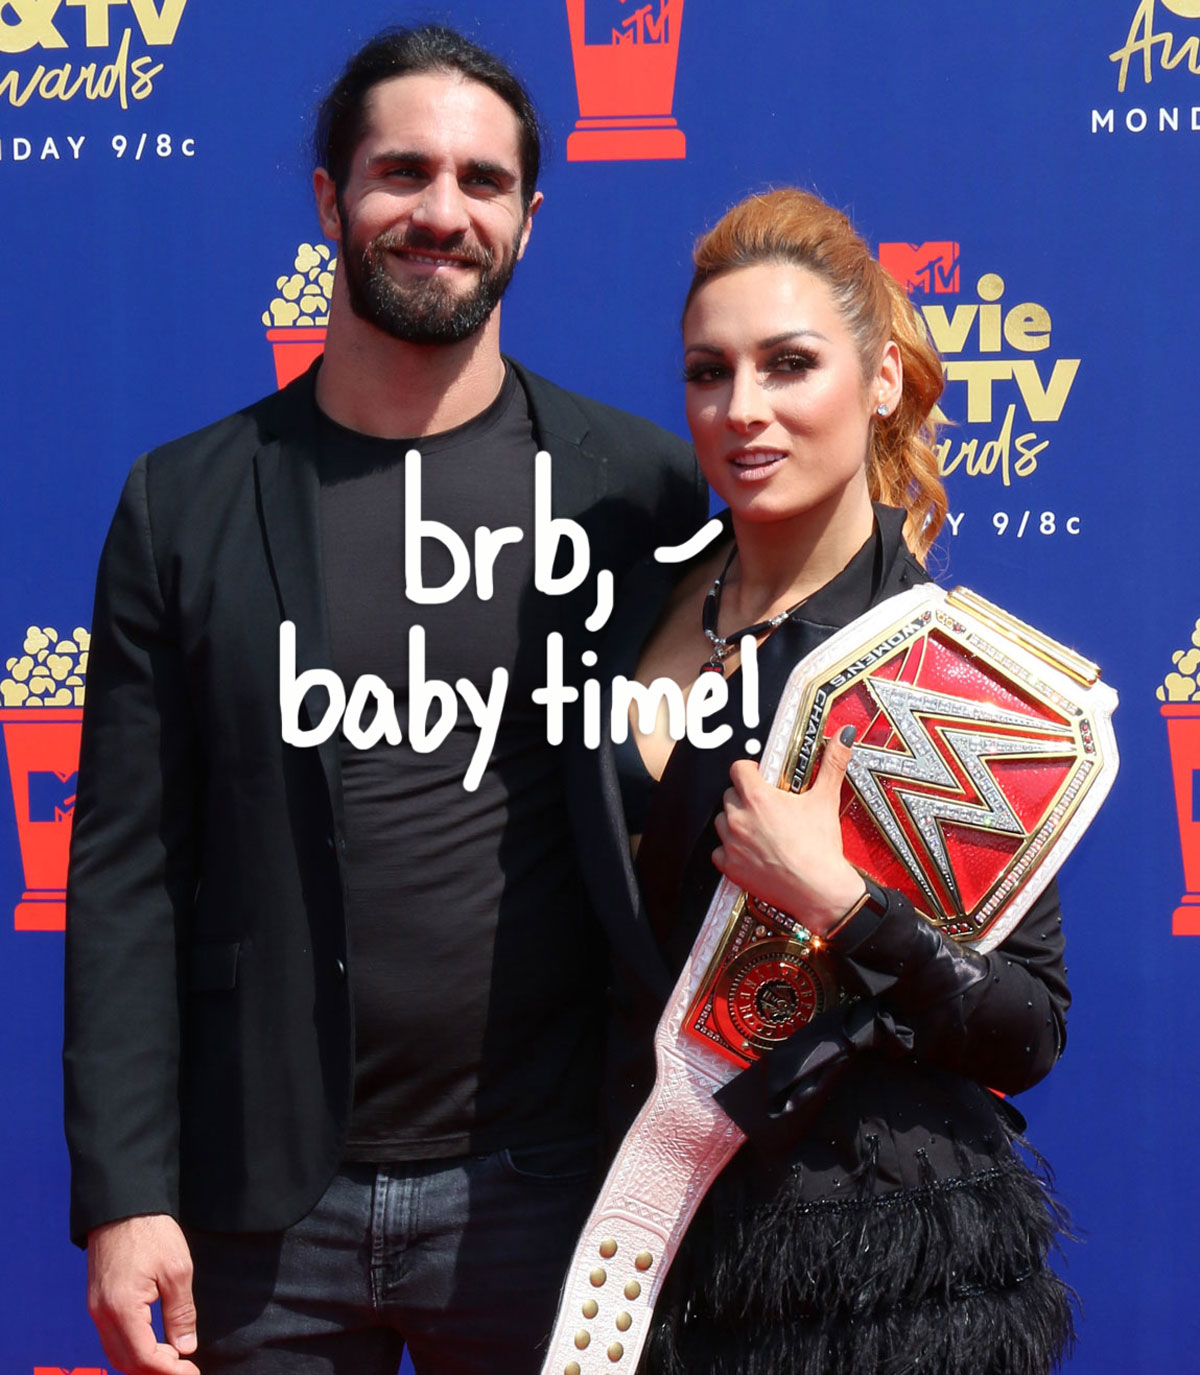 WWE star Becky Lynch appears to confirm she is dating Seth Rollins